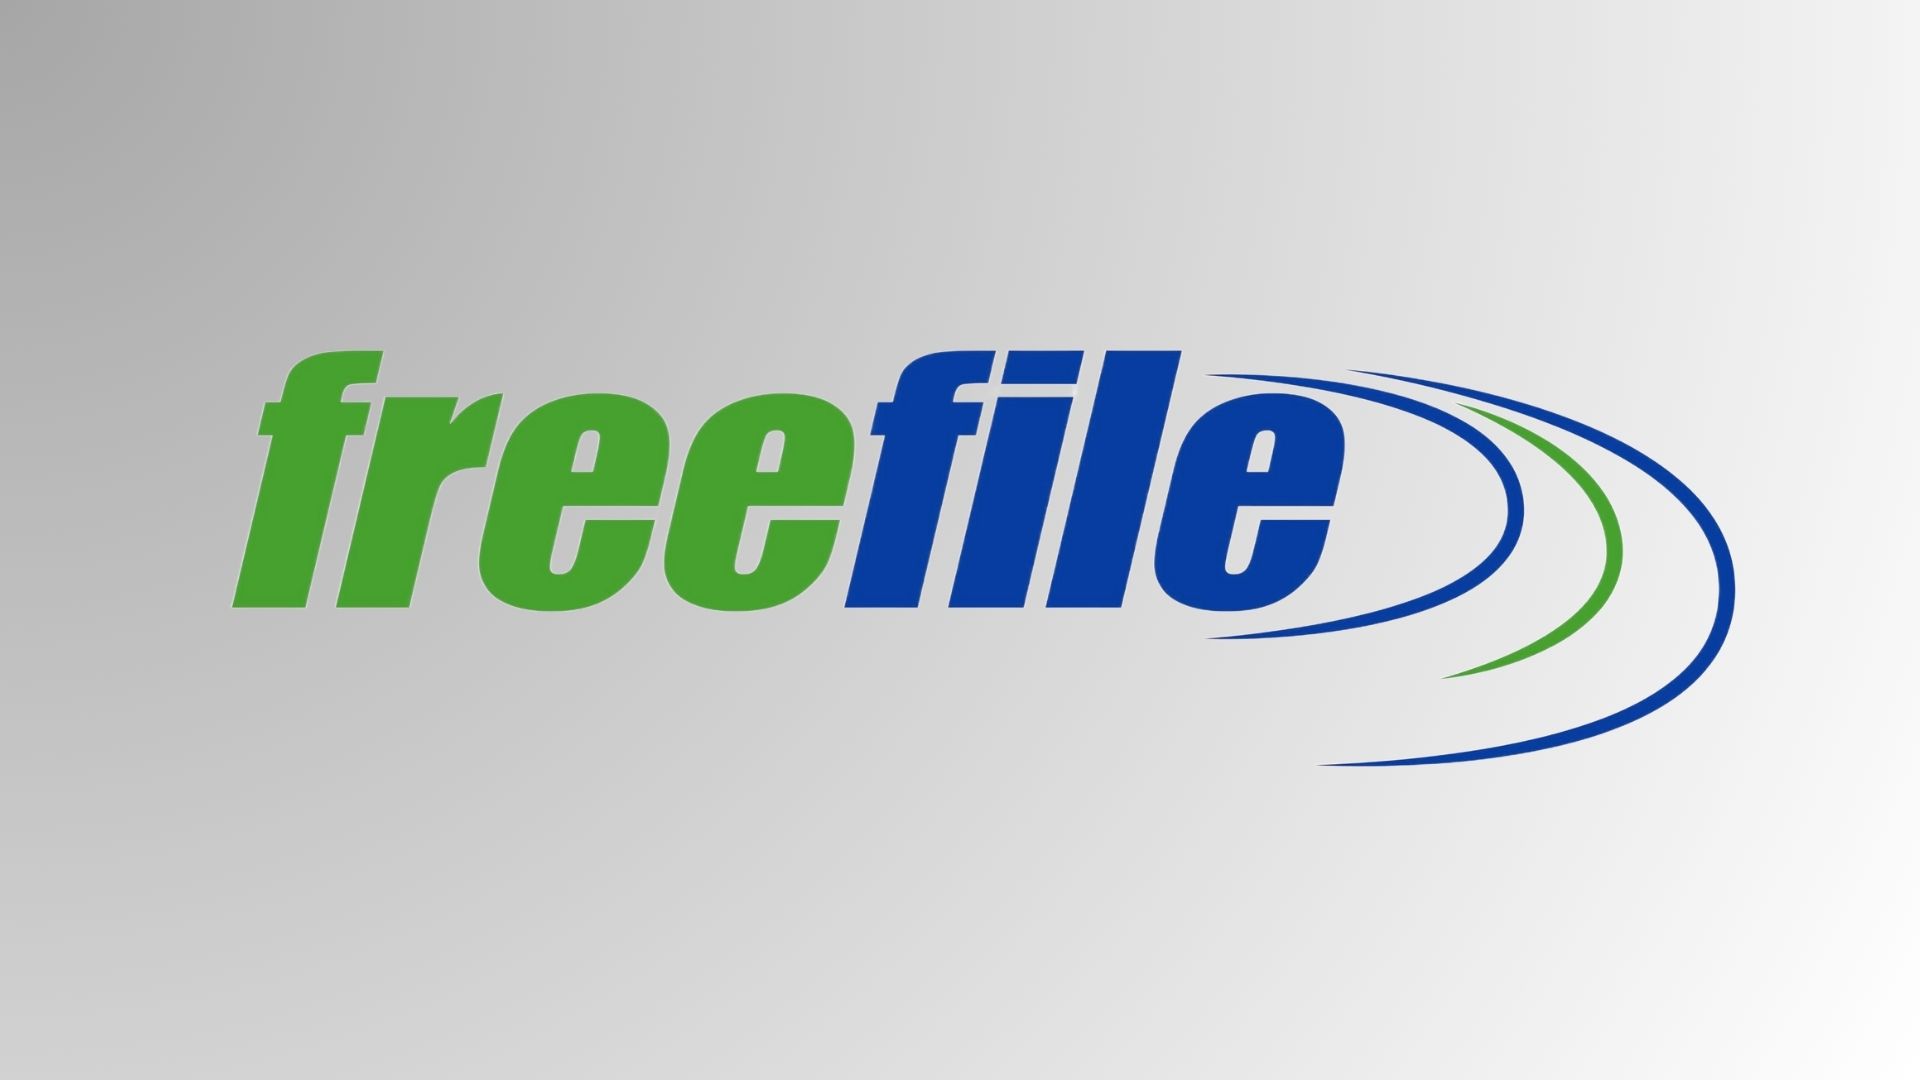 Using IRS Free File is an easy way around H&R Block server overload issues